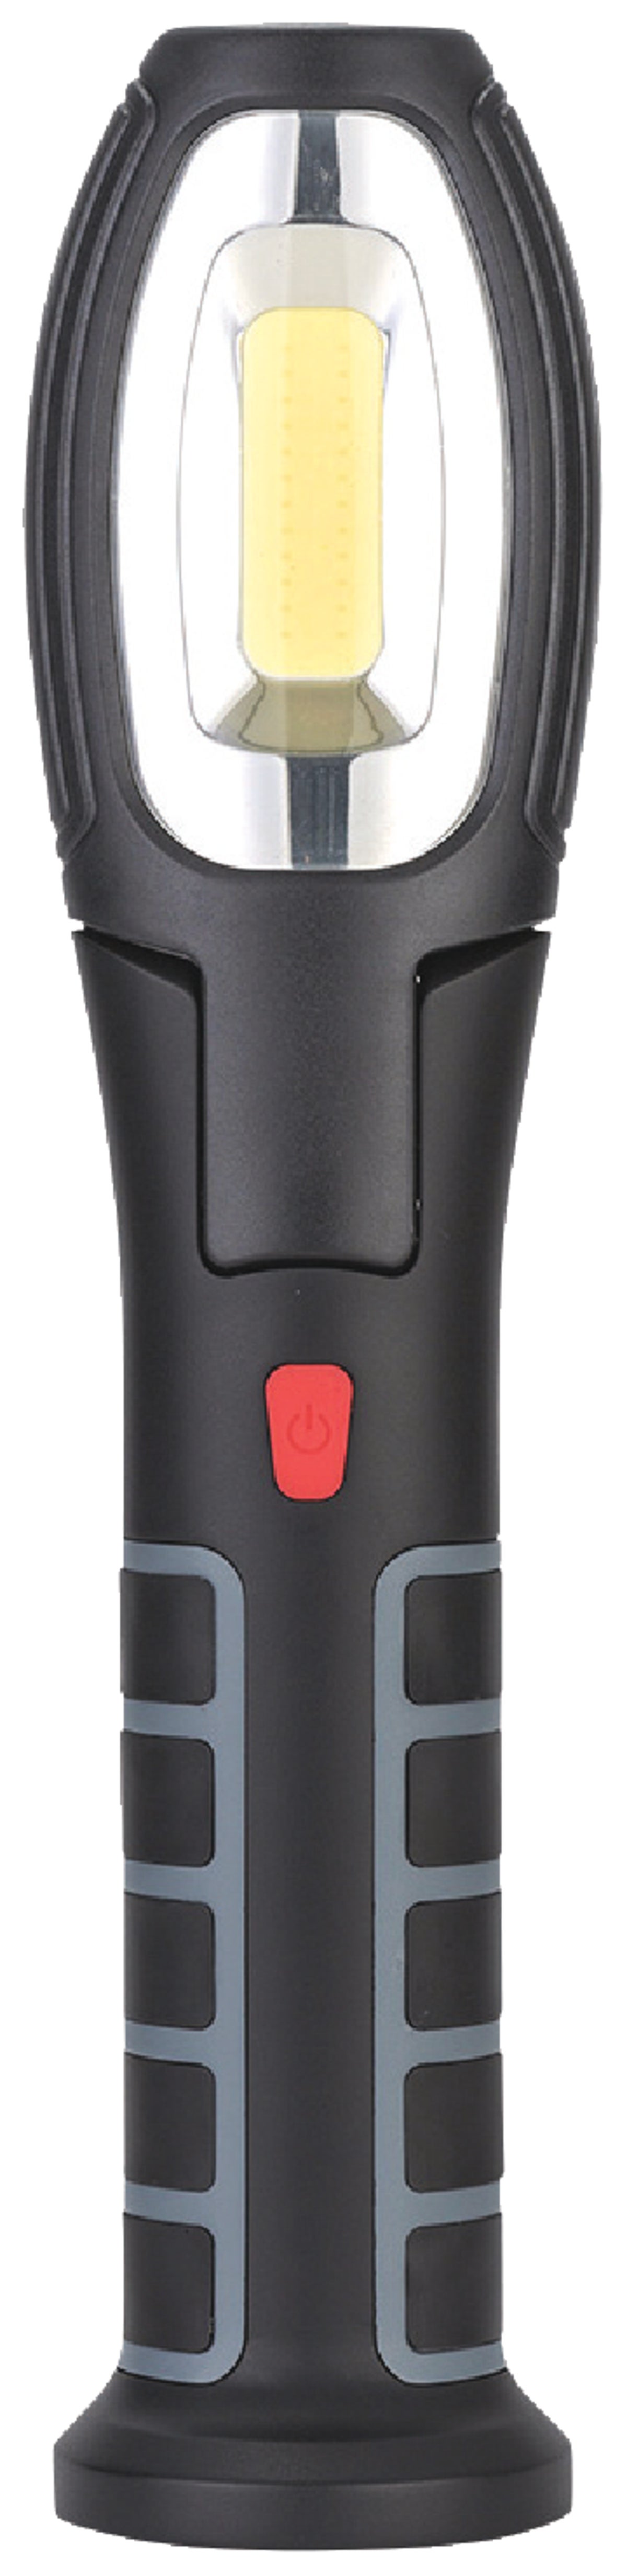 Feit Electric 500 Lm. LED Rechargeable Swivel Handheld Work Light